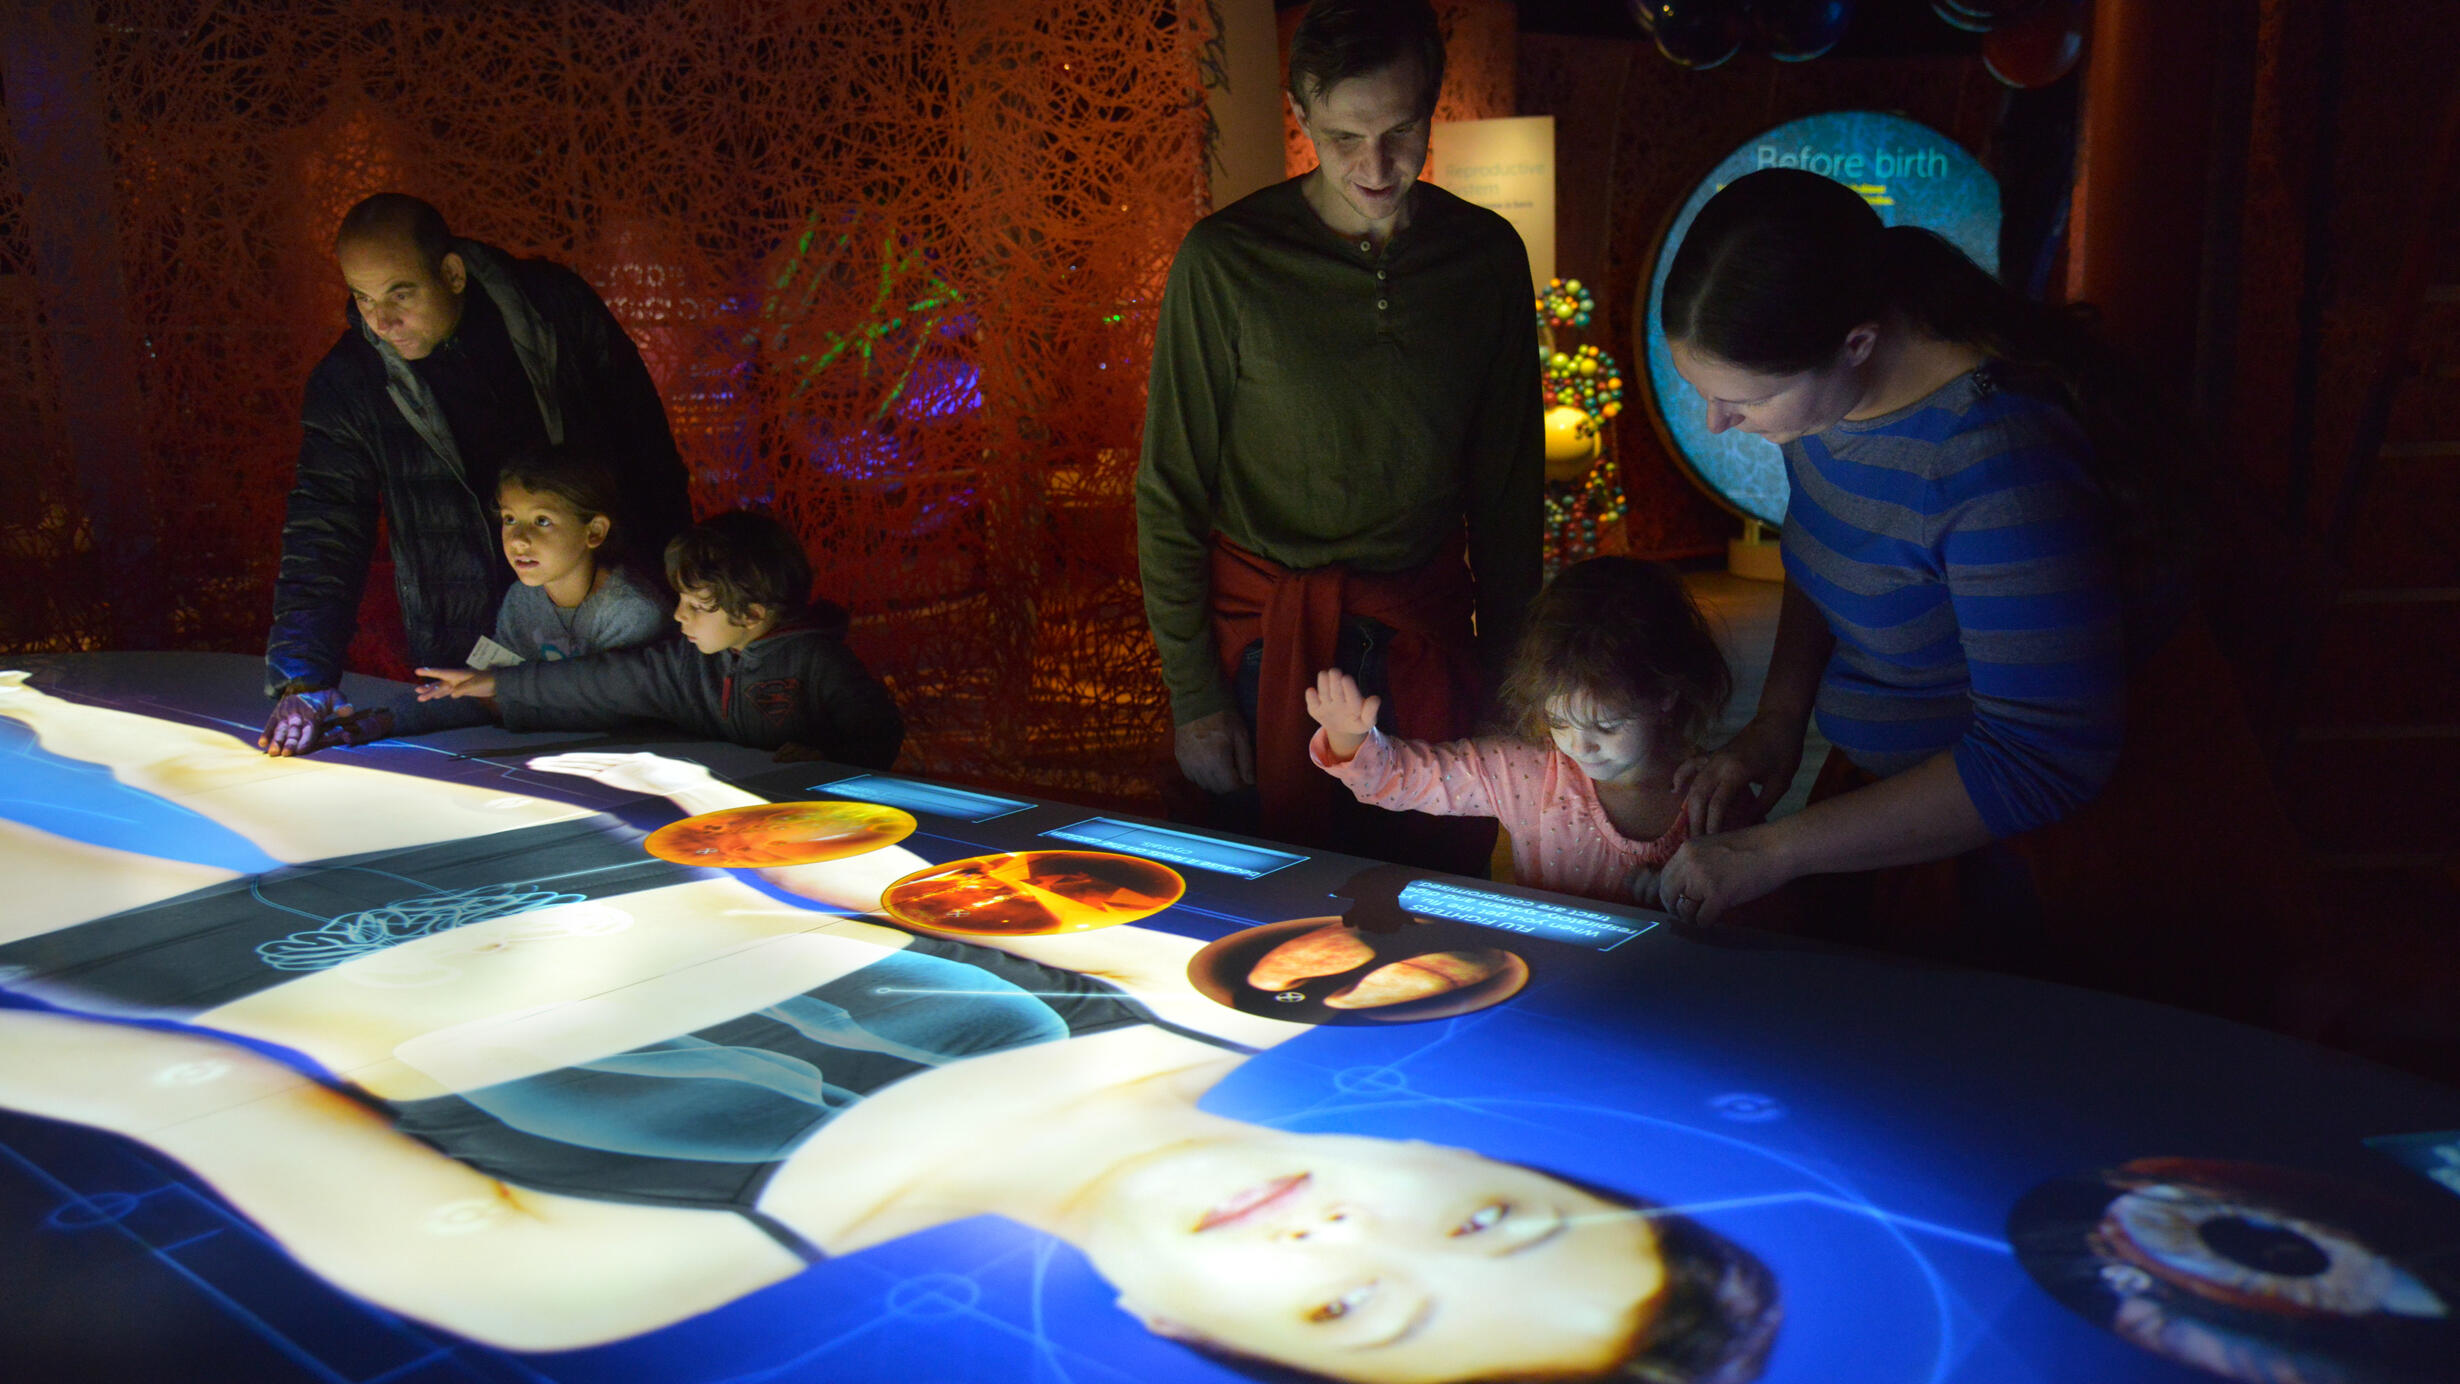 Two groups of families interact with a table projection of a woman with details of microbes inside the body